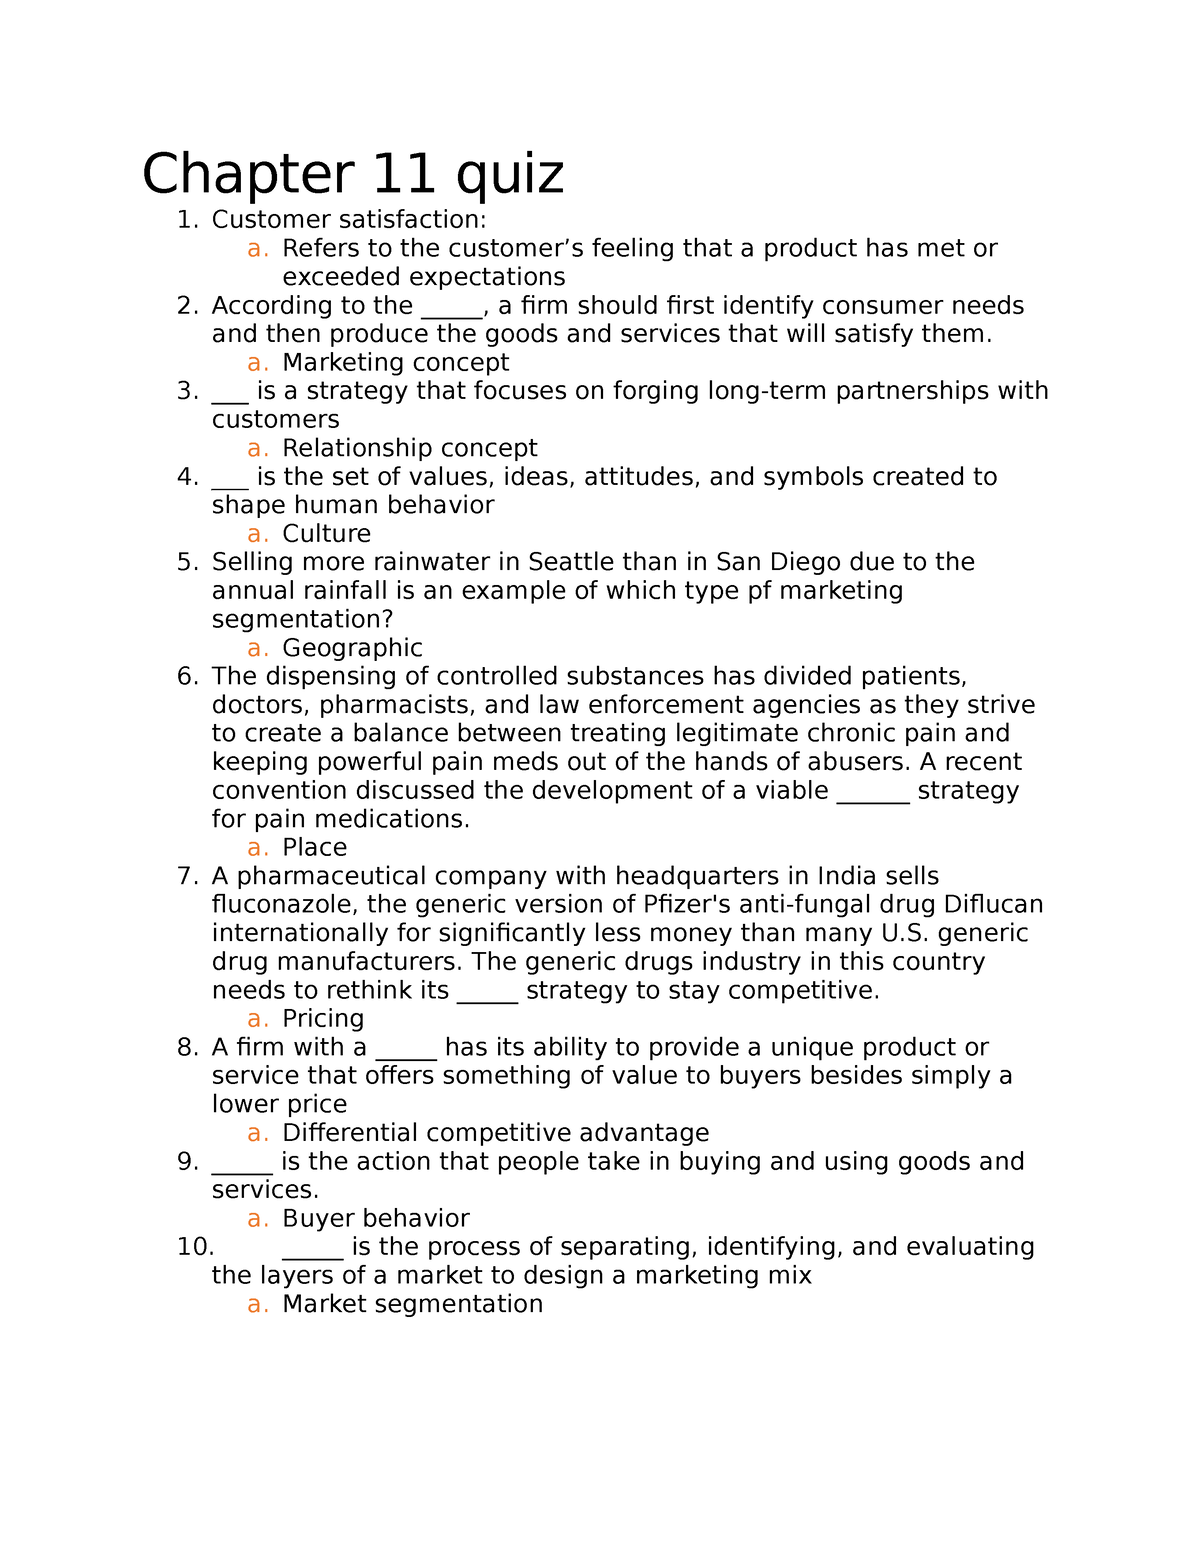 Ch 11 quiz - Ch 11 quiz - HIEU 201 CHAPTER 11 QUIZ MINDTAP All of the  following were true of - Studocu